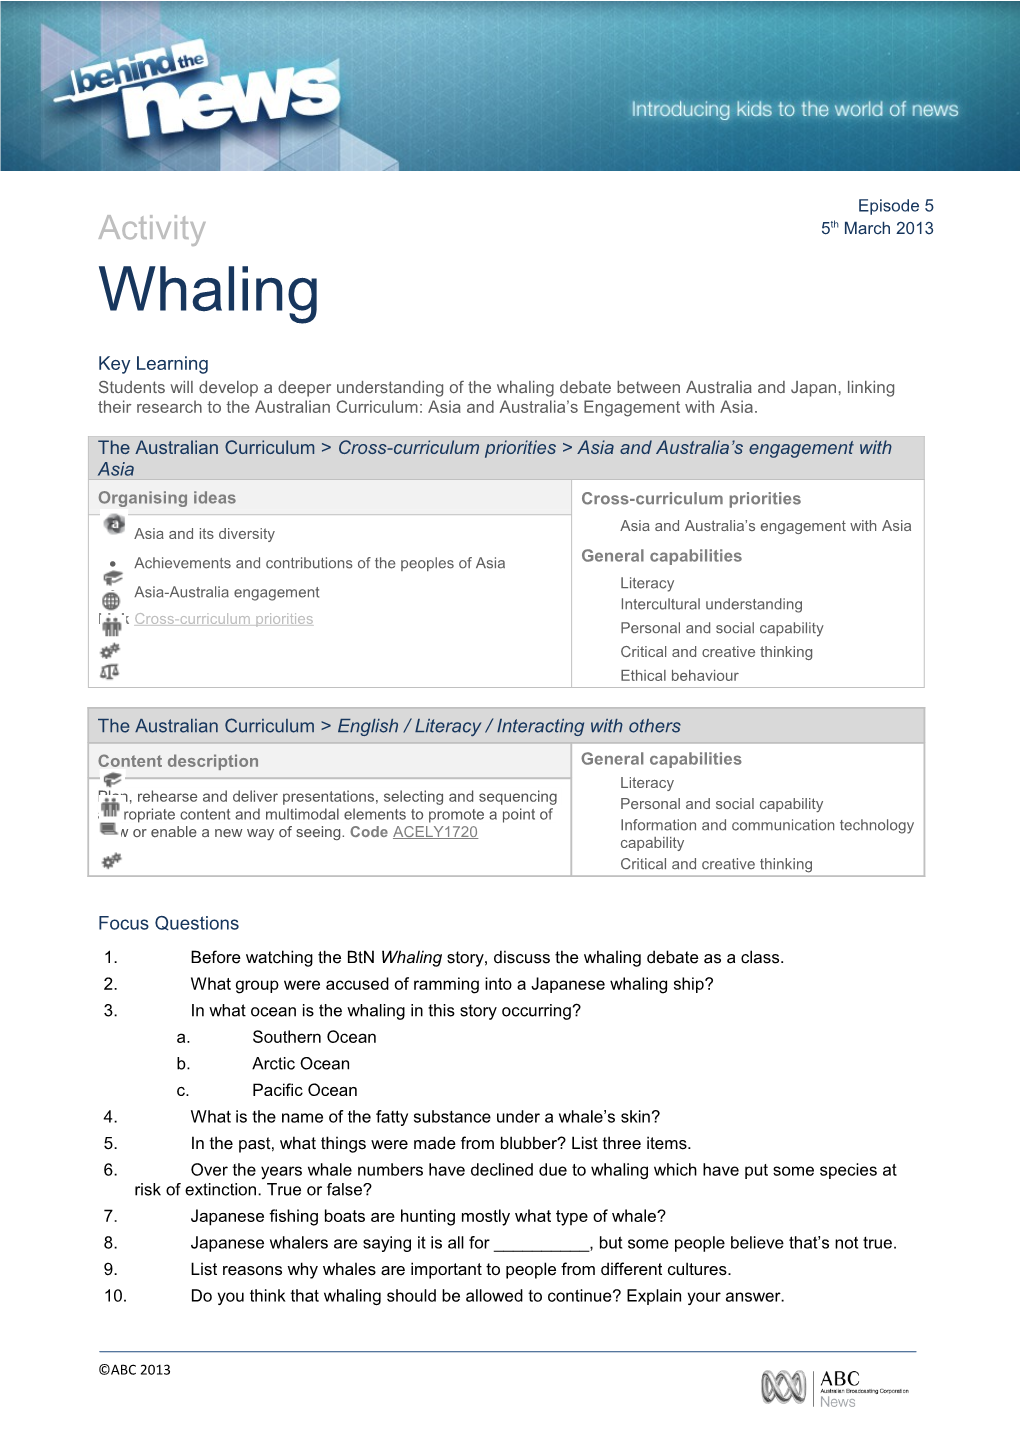 Students Will Develop a Deeper Understanding of the Whaling Debate Between Australia And